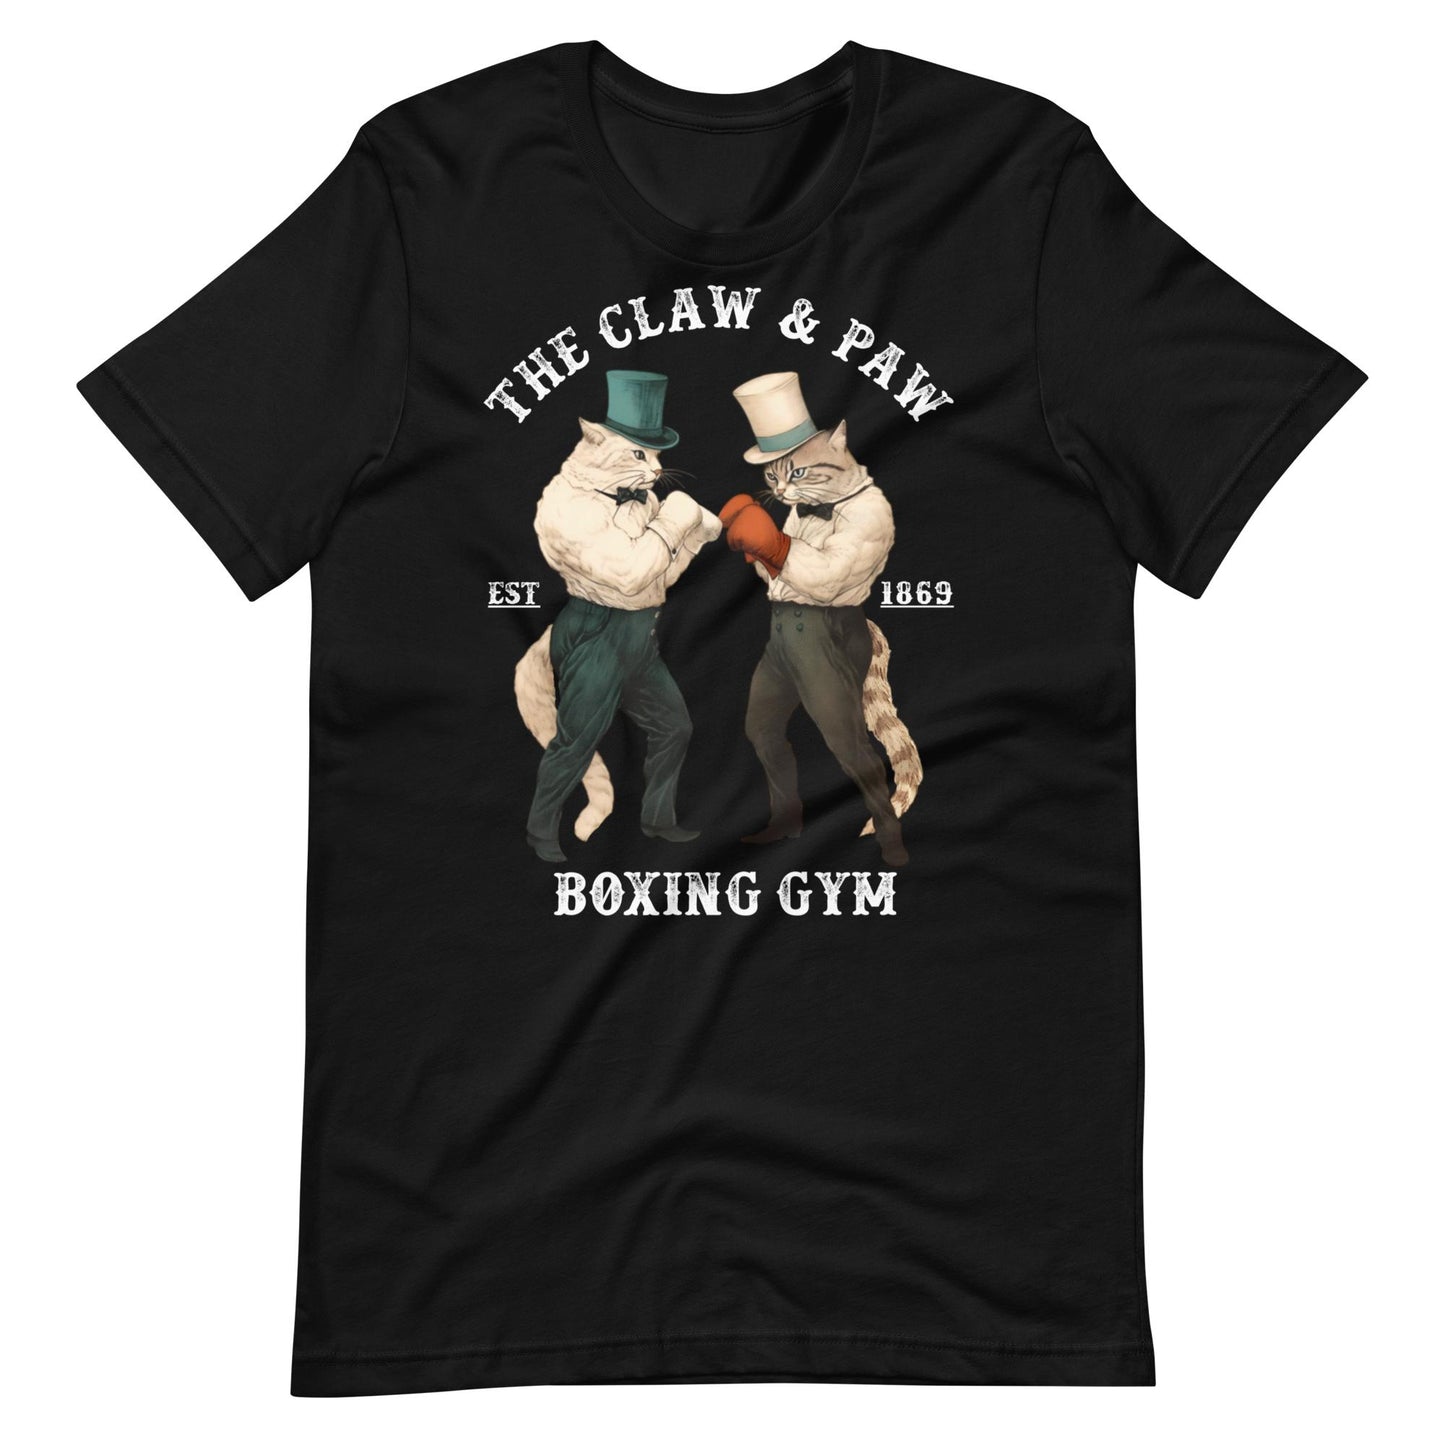 The Claw & Paw Boxing Gym T-Shirt